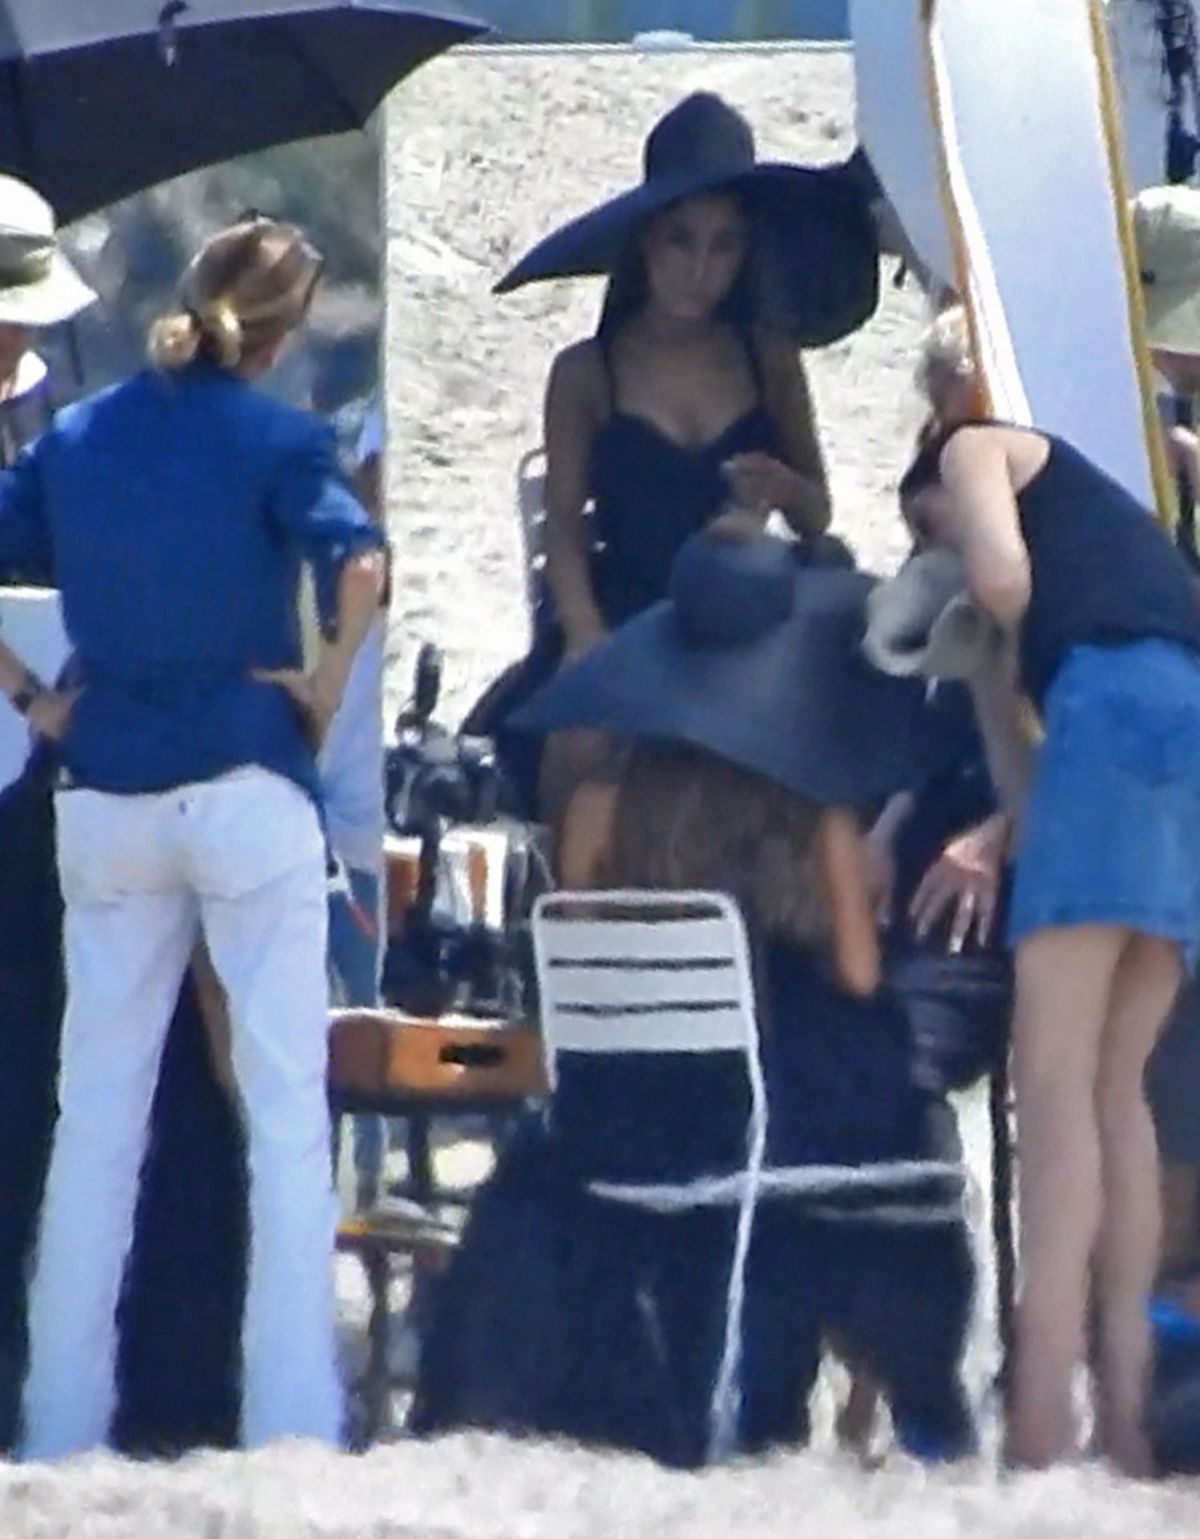 ariana-grande-on-the-set-of-a-photoshoot-at-a-beach-in-boca-raton-06-04-2019-2.jpg